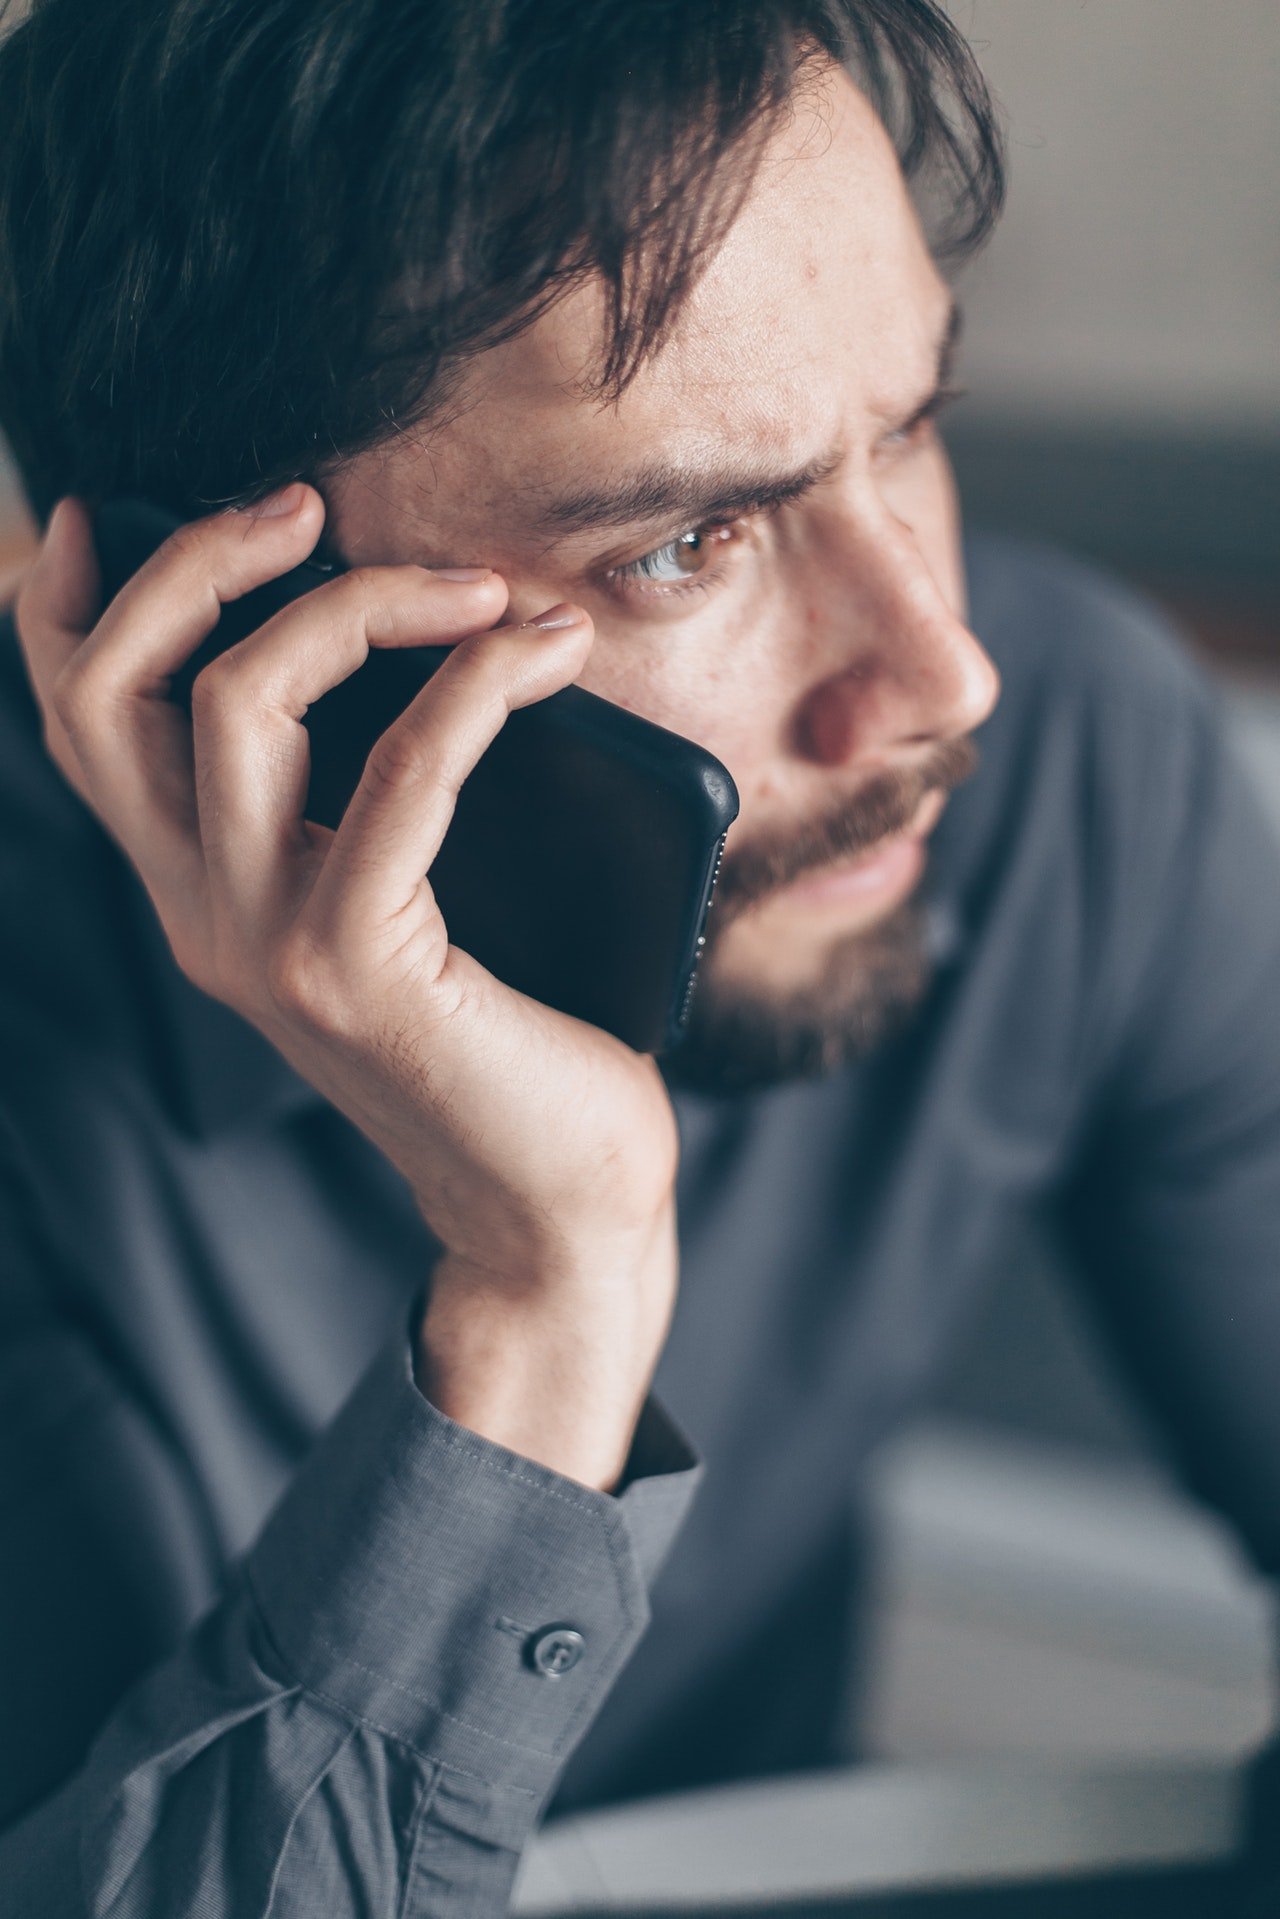 A man on the phone | Source: Pexels